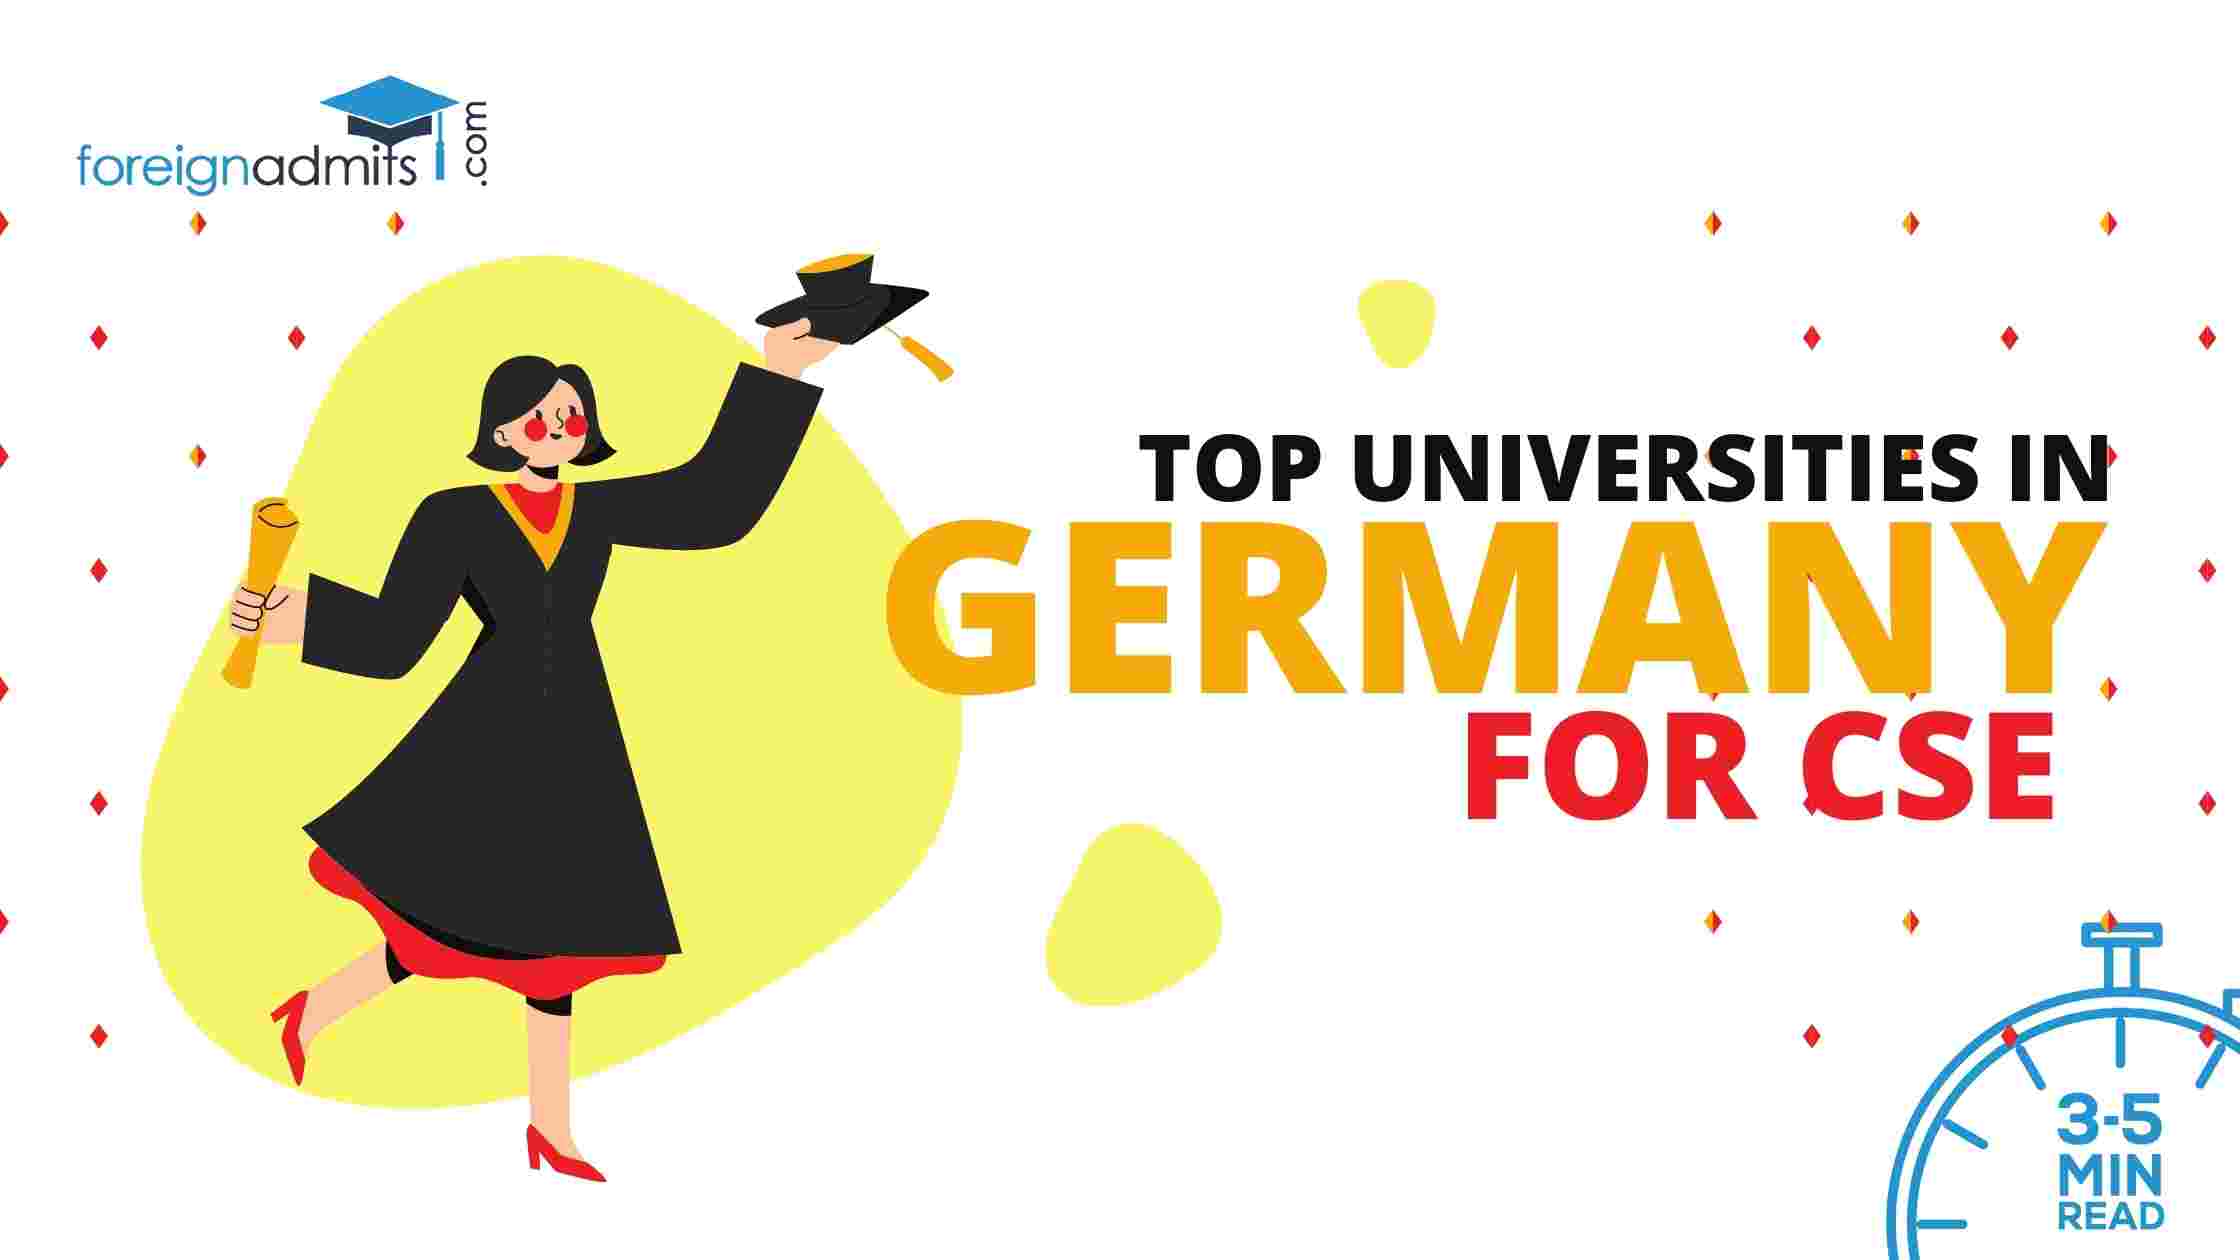 Top Universities In Germany For CSE